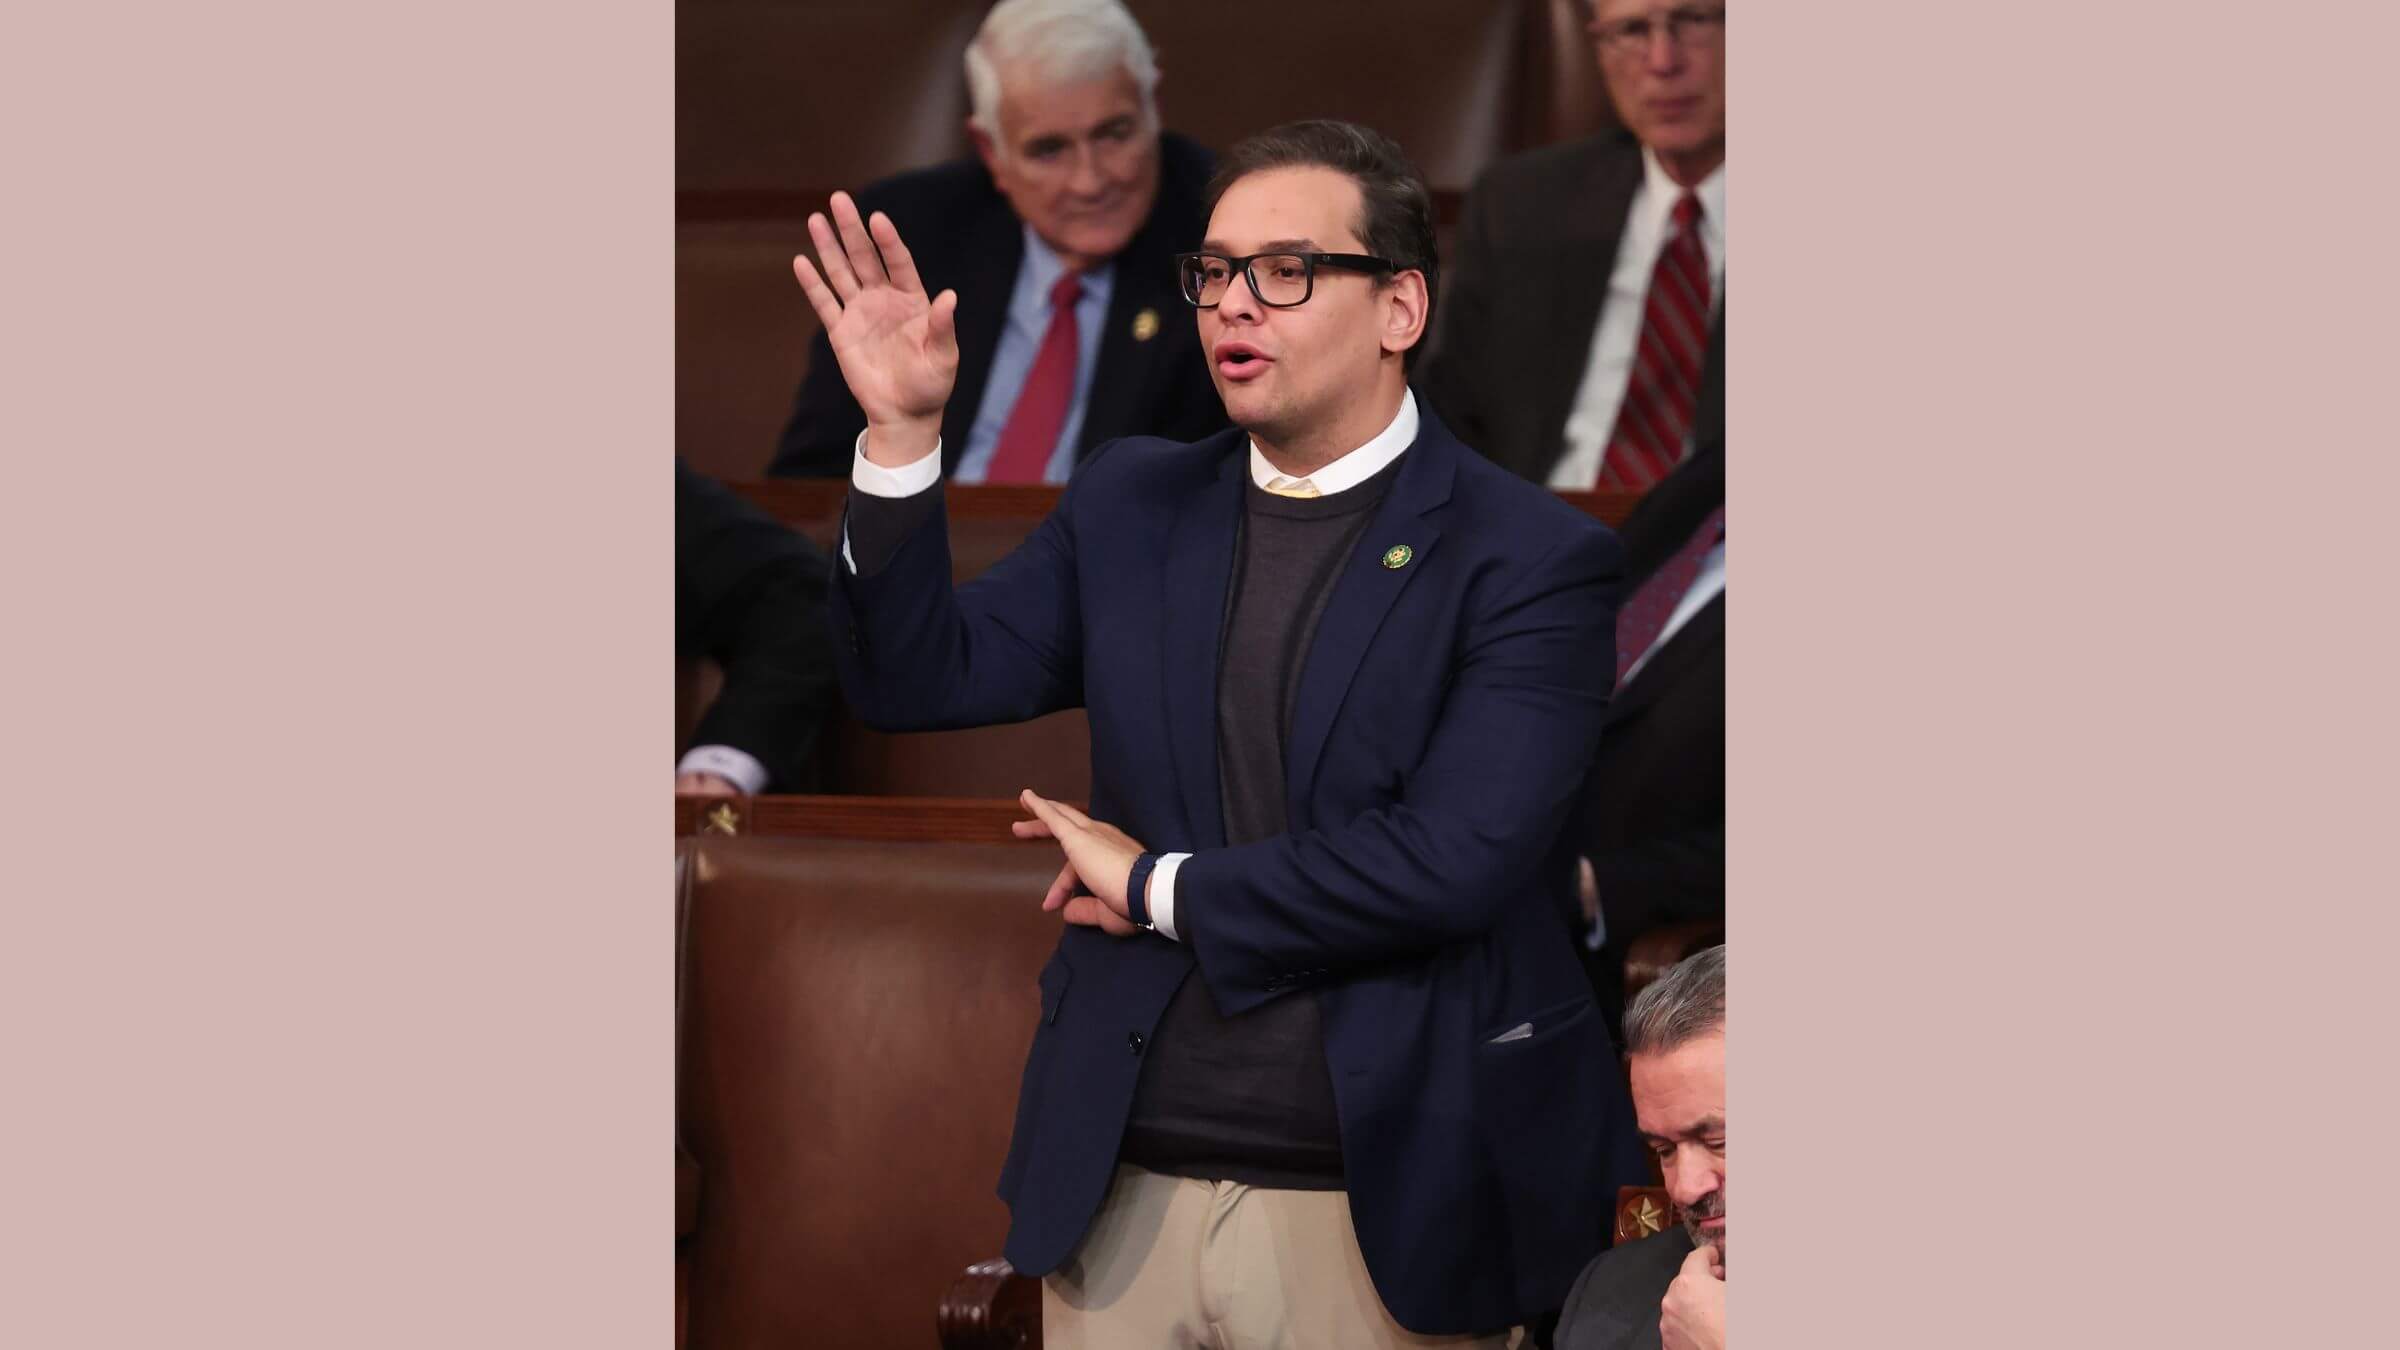 Rep. George Santos in the House of Representatives in Washington, D.C., Jan. 5, 2023. Santos has repeatedly been photographed making what some of his critics believe is a white-power hand gesture.